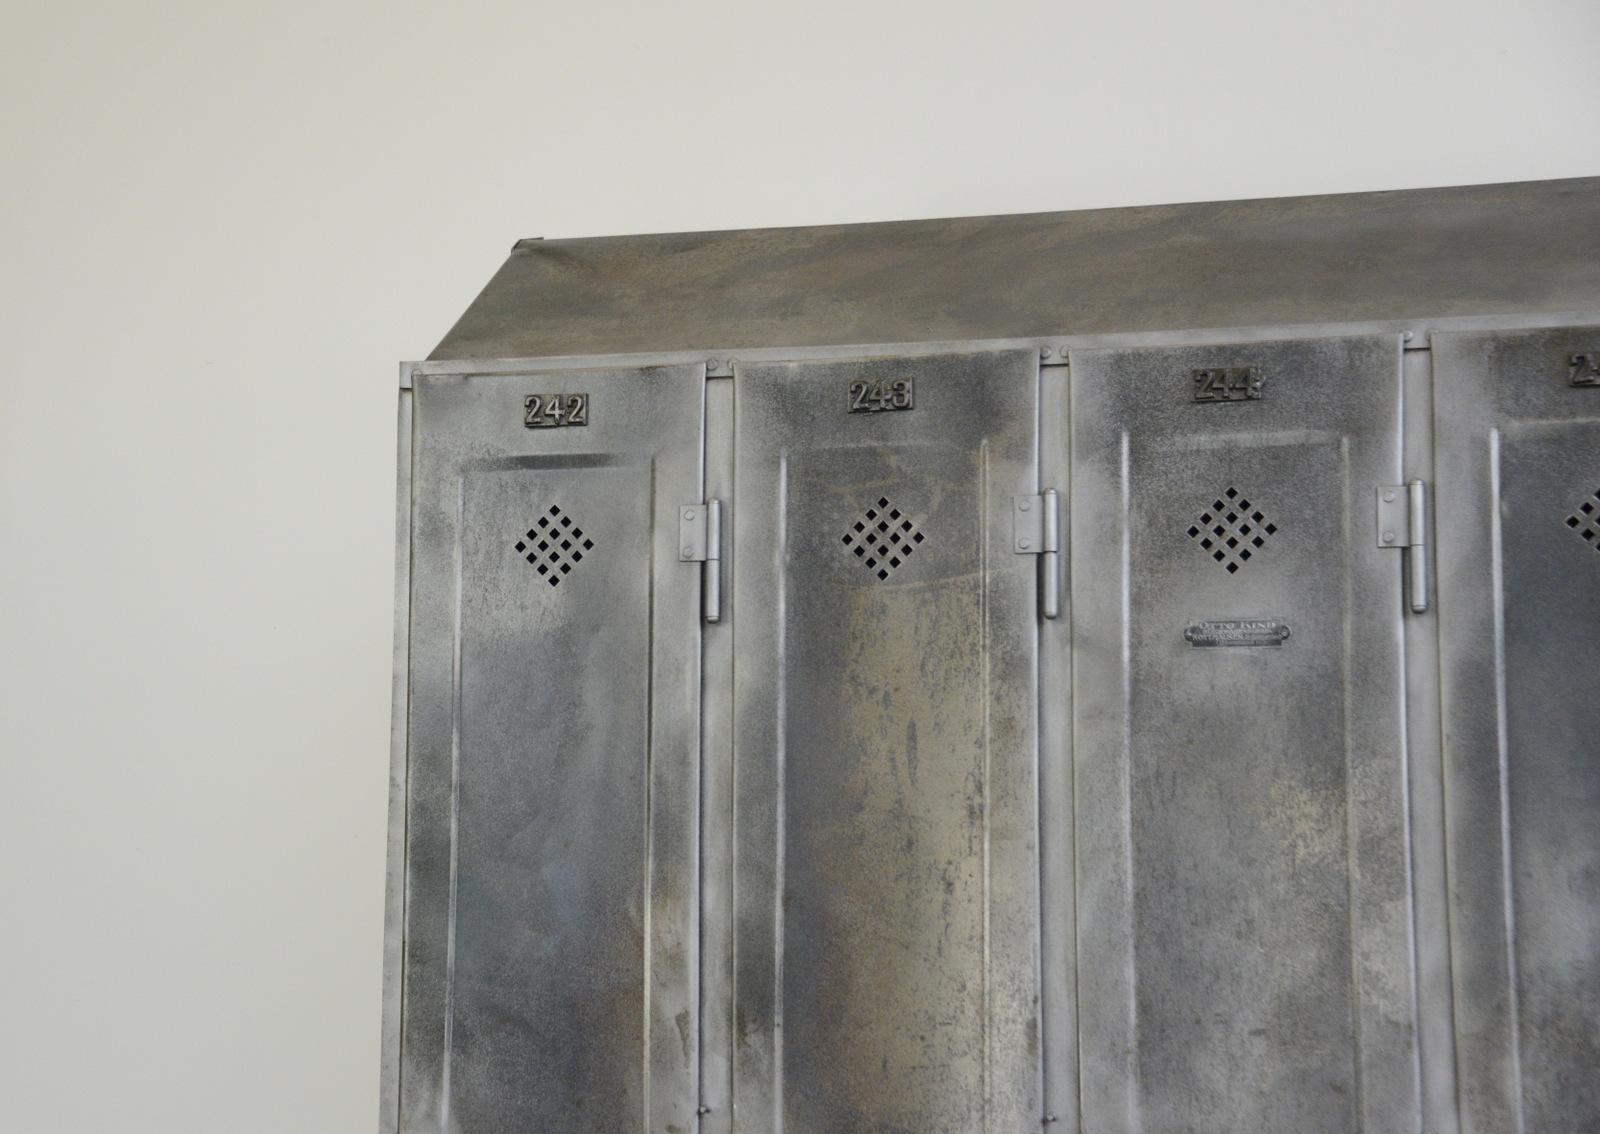 German Industrial Lockers by Otto Kind, circa 1920s